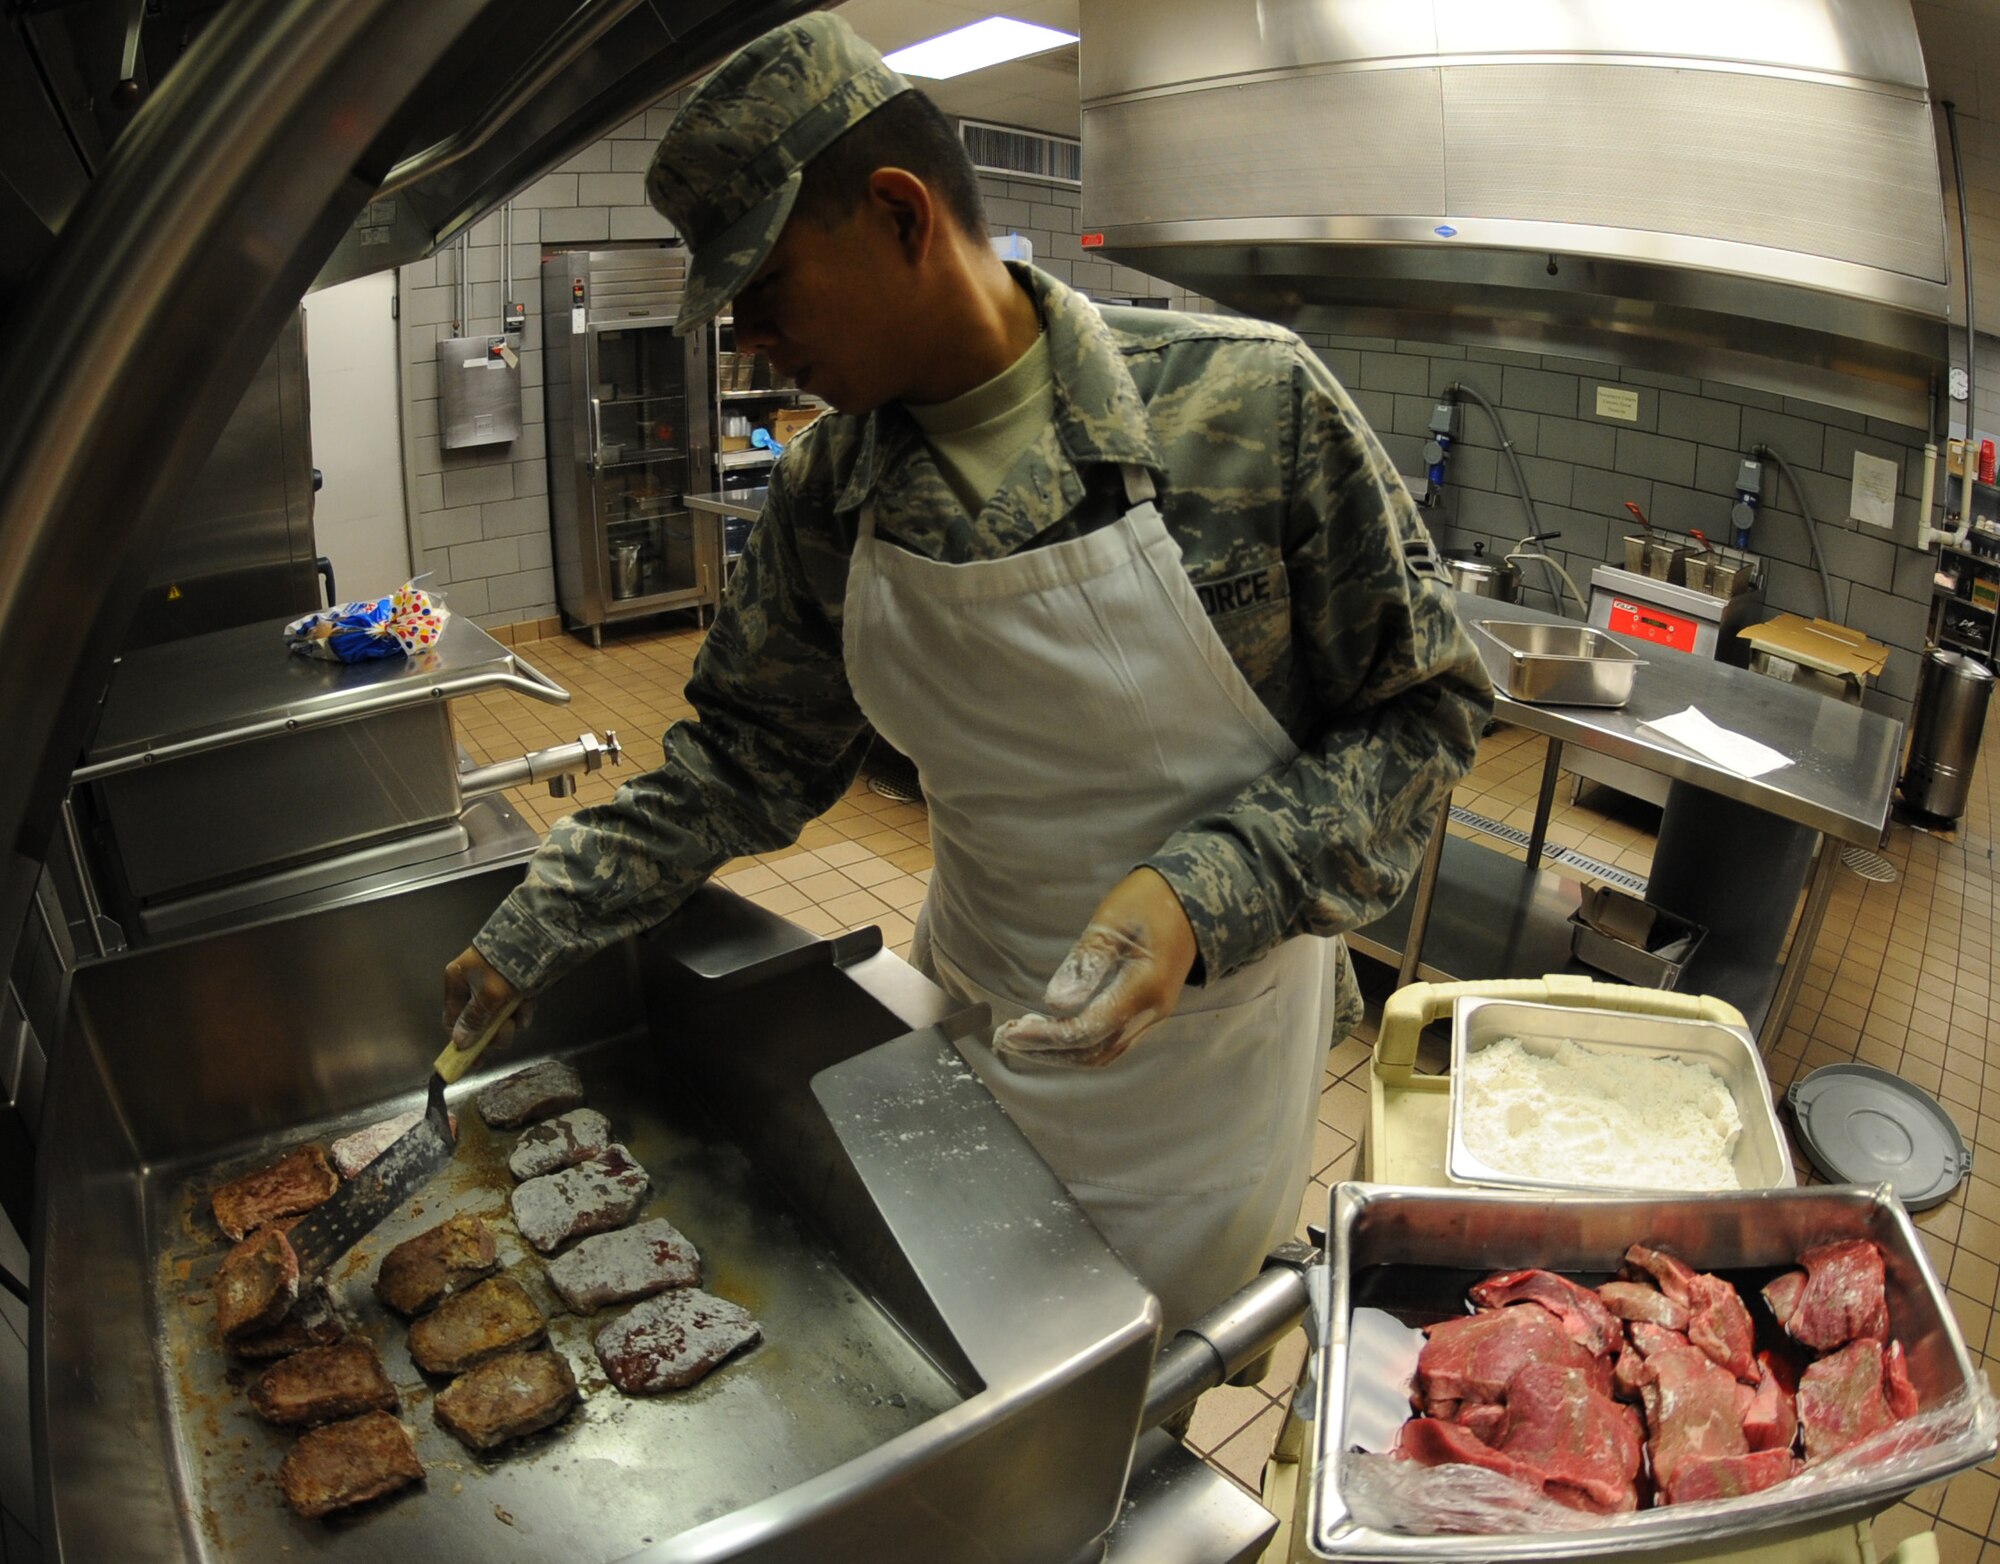 Airman 1st Class Marco Tordera, 509th Force Support Squadron food services technician, prepares Swiss Steaks on a Tilt Grill at the Ozark Inn Dining Facility Nov. 2 at Whiteman Air Force Base, Mo. The Ozark Inn provides nutrition facts for all meals served. (U.S. Air Force photo/Airman 1st Class Bryan Crane) (Released)